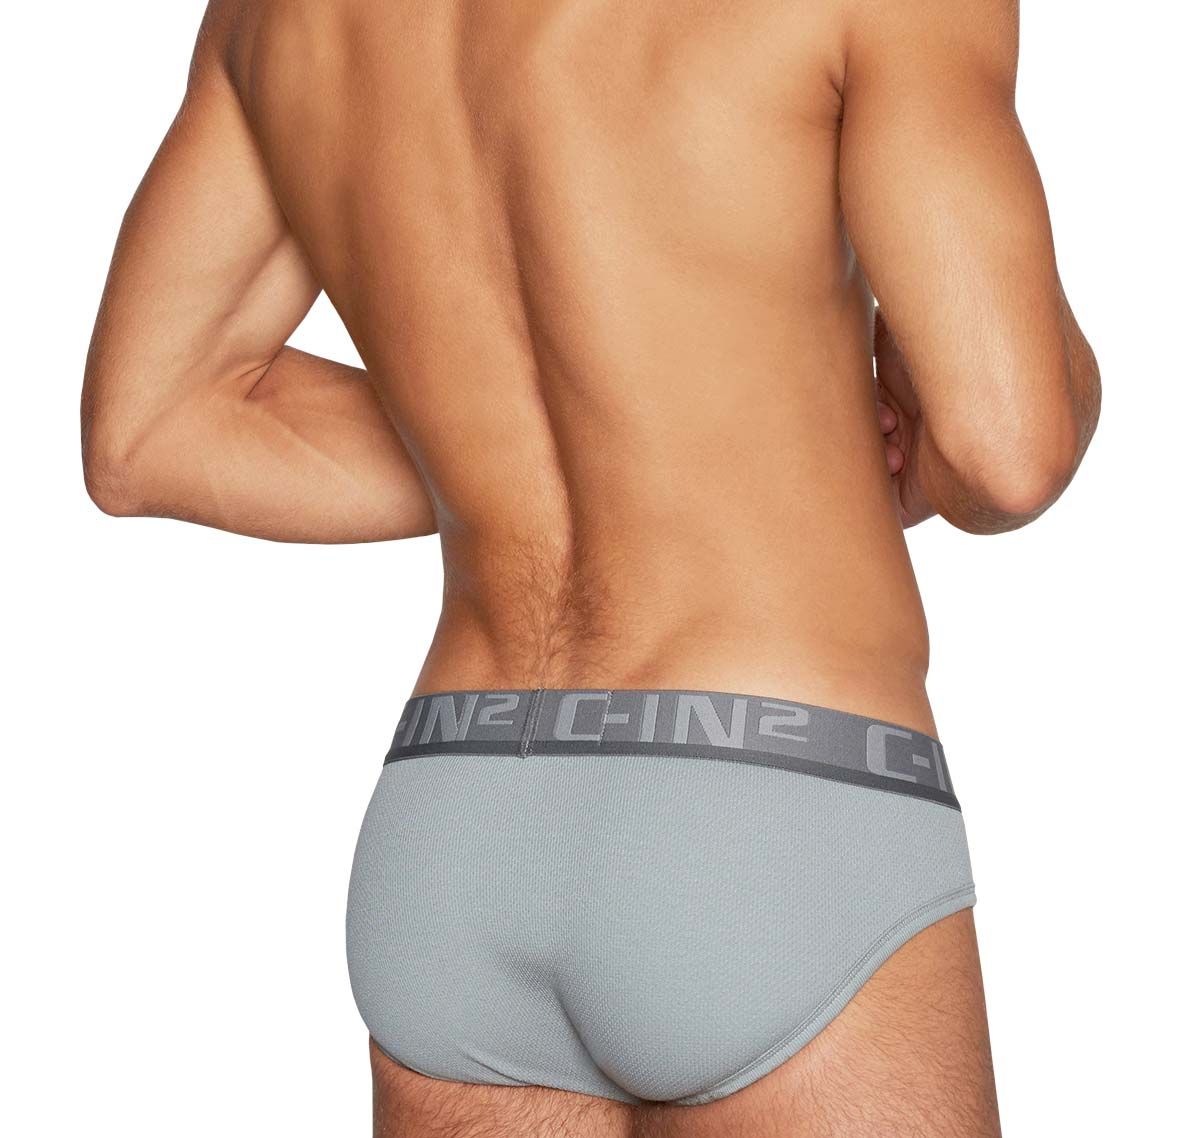 C-IN2 Slip C-Theory LOW RISE BRIEF 8013-057, gris